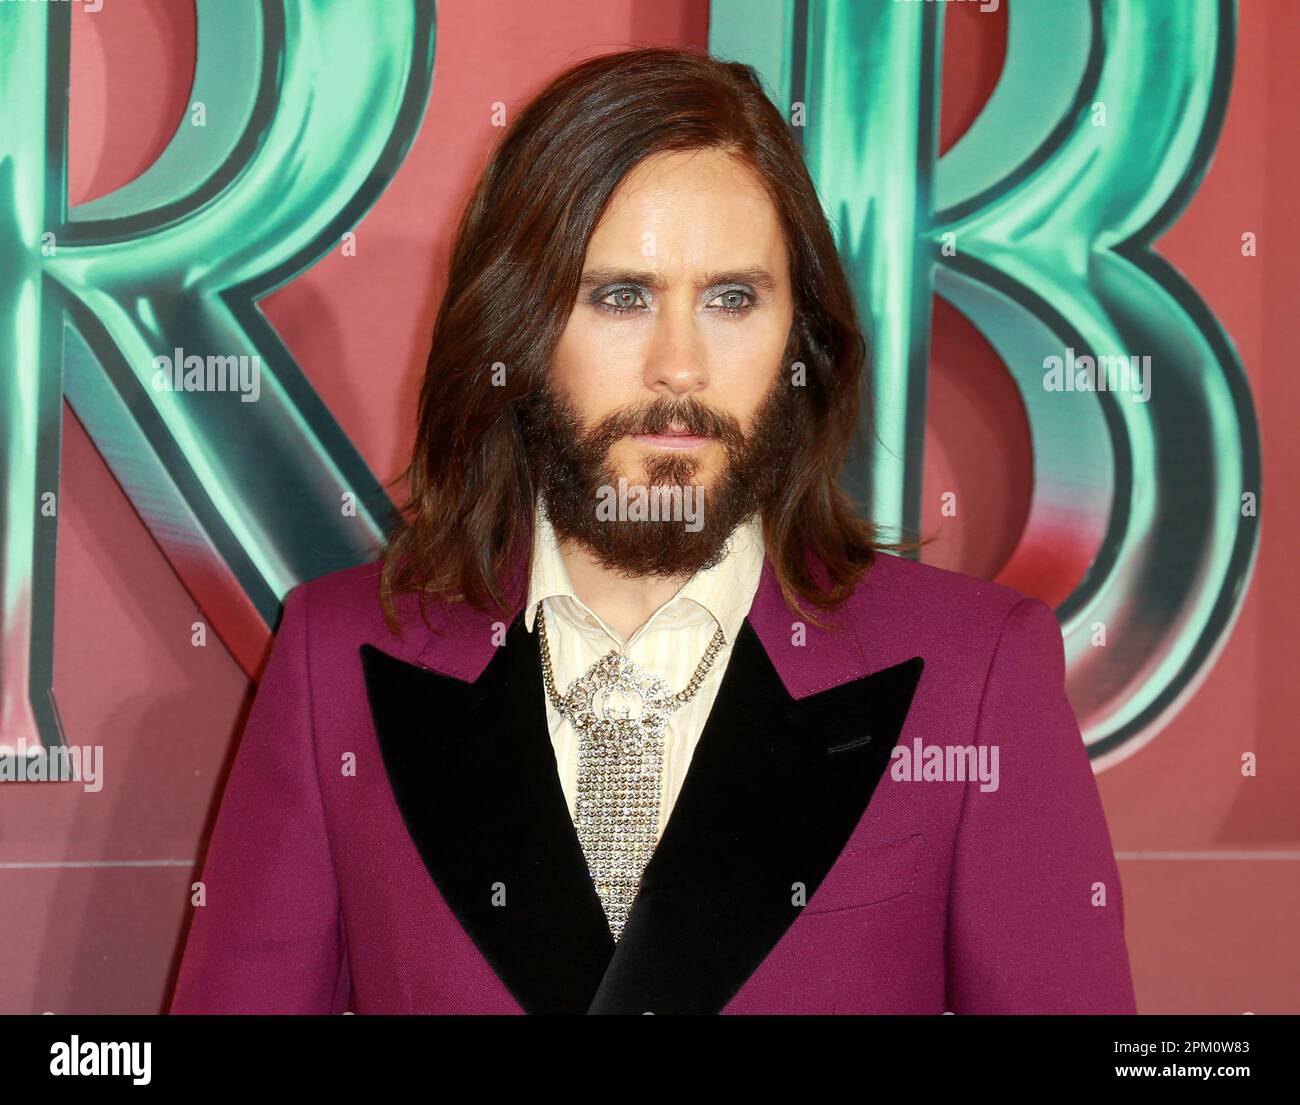 London, UK. 24th Mar, 2022. Jared Leto attends the 'Morbius' London fan screening at Odeon Luxe Leicester Square in London. (Photo by Fred Duval/SOPA Images/Sipa USA) Credit: Sipa USA/Alamy Live News Stock Photo